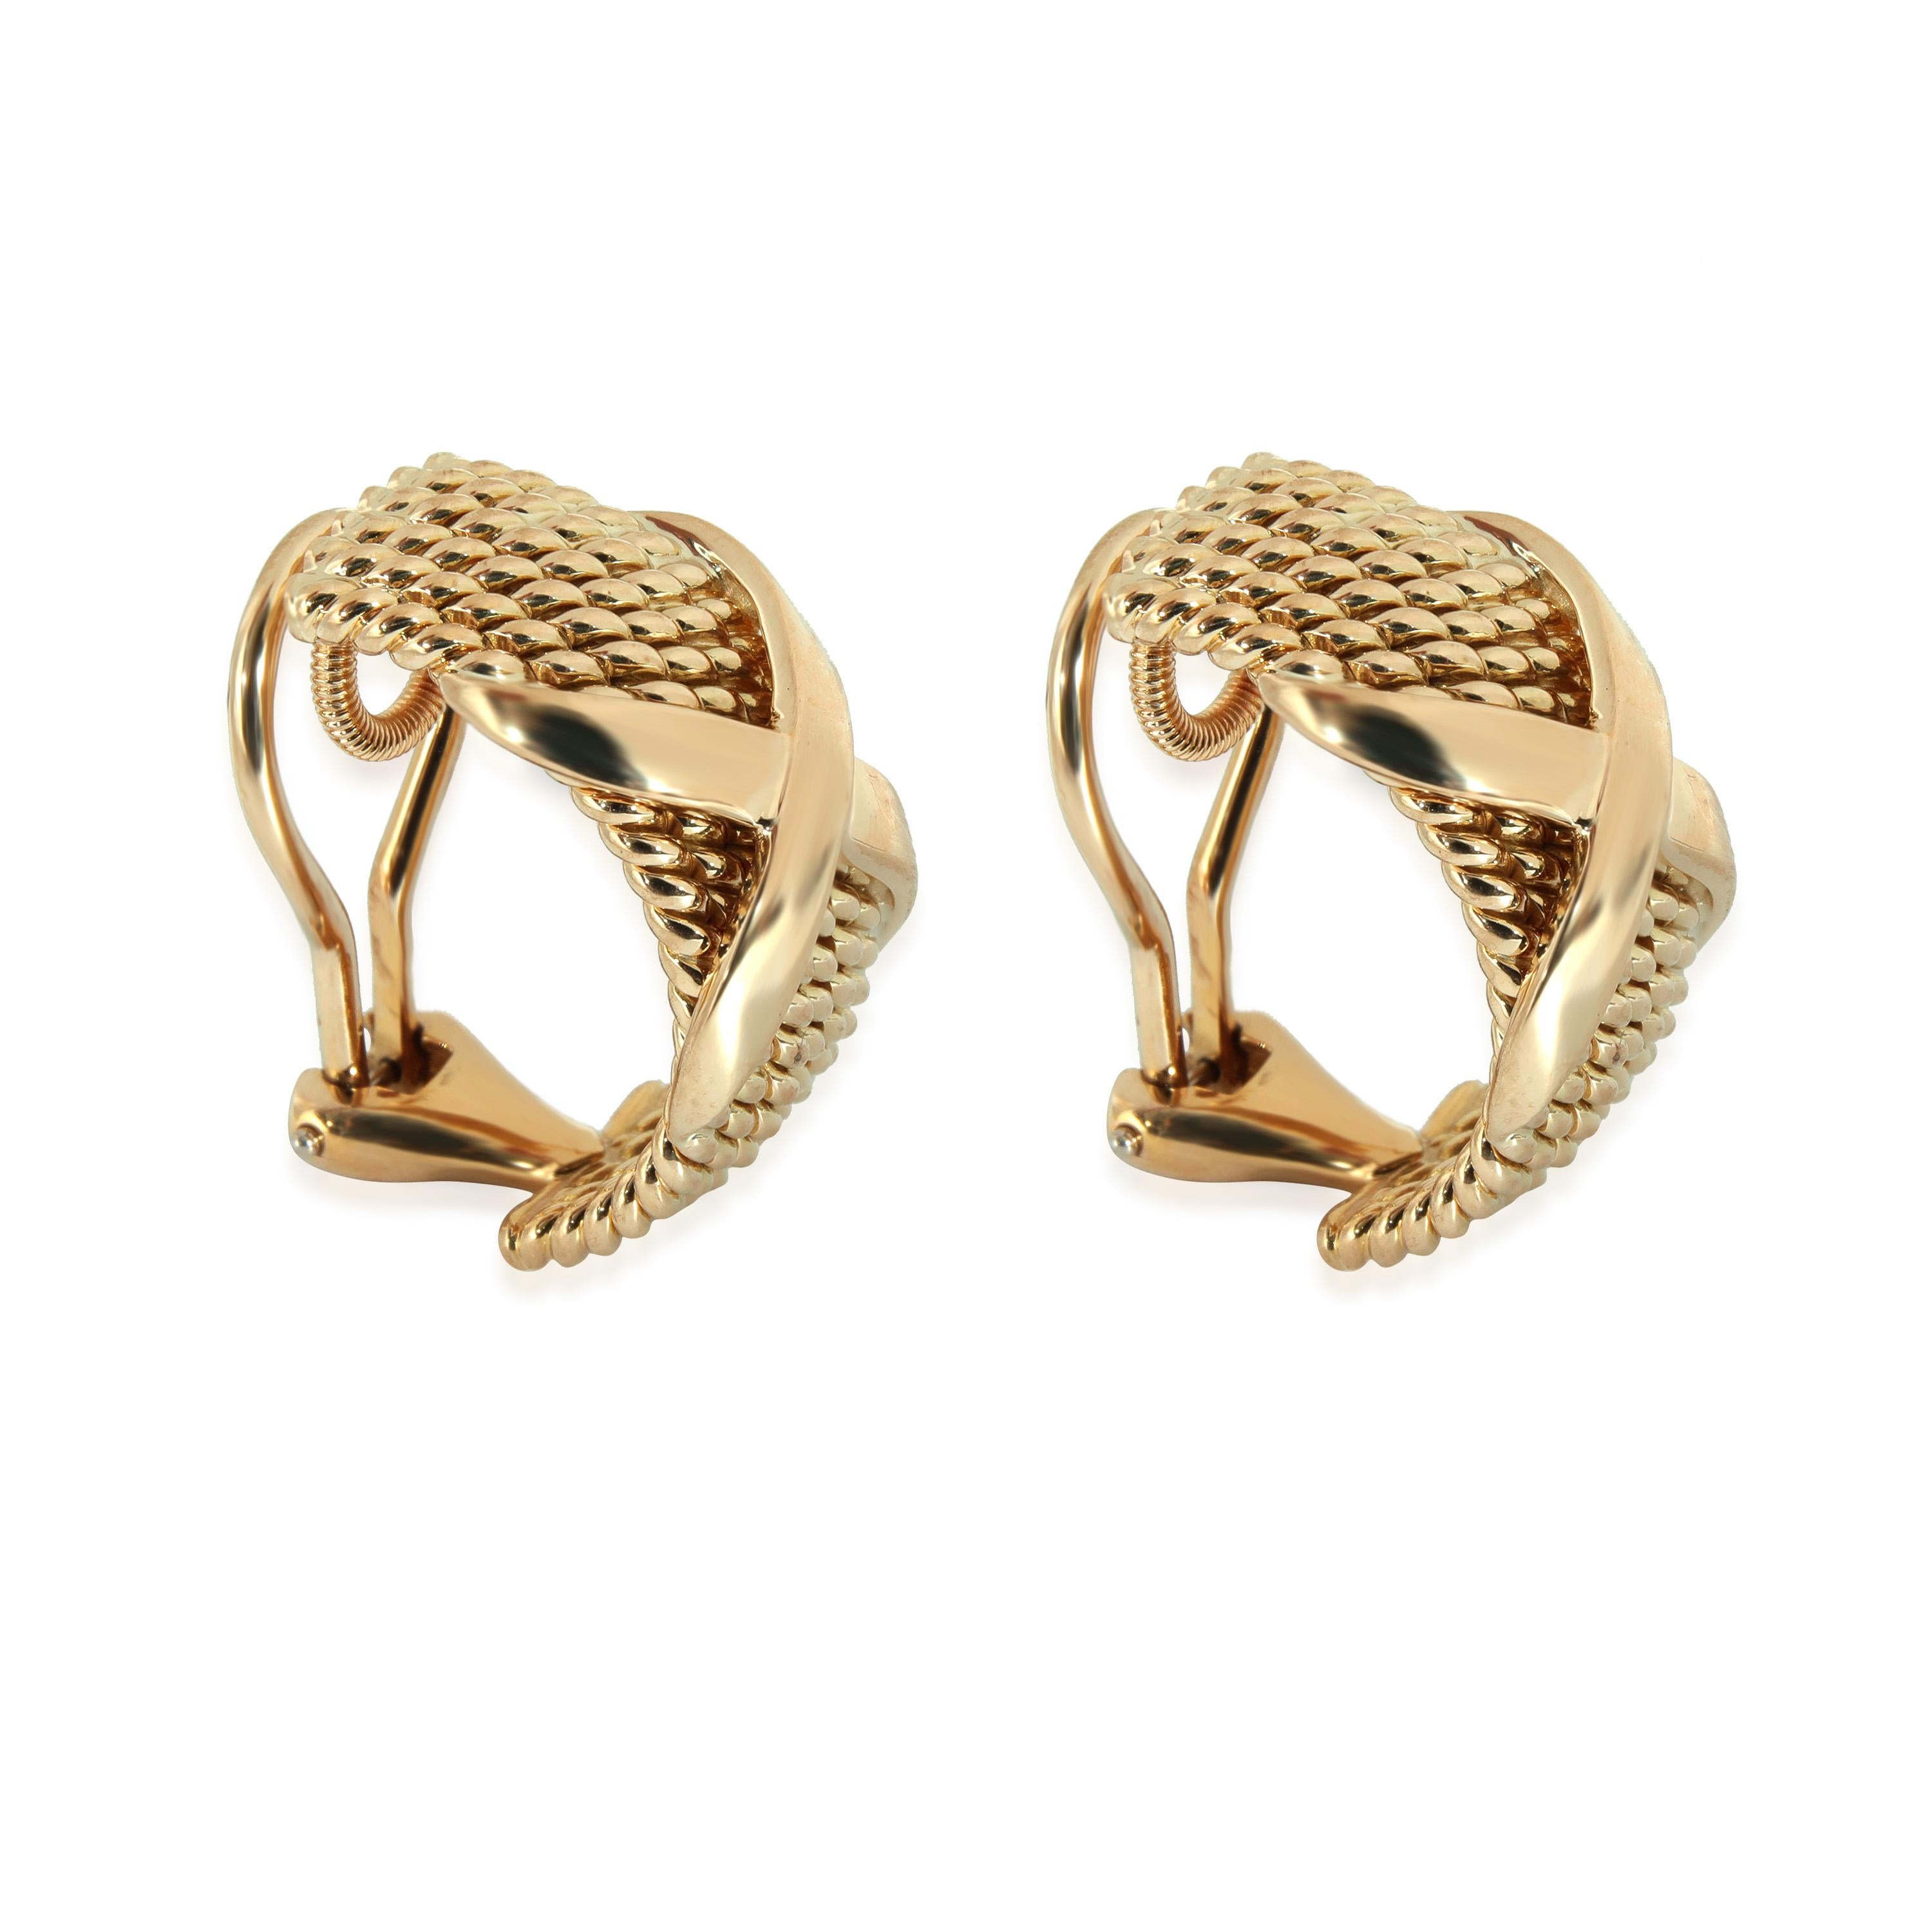 Tiffany & Co. Schlumberger Vintage X Earrings in 18k 18K Yellow Gold

PRIMARY DETAILS
SKU: 130847
Listing Title: Tiffany & Co. Schlumberger Vintage X Earrings in 18k 18K Yellow Gold
Condition Description: “I want to capture the irregularity of the